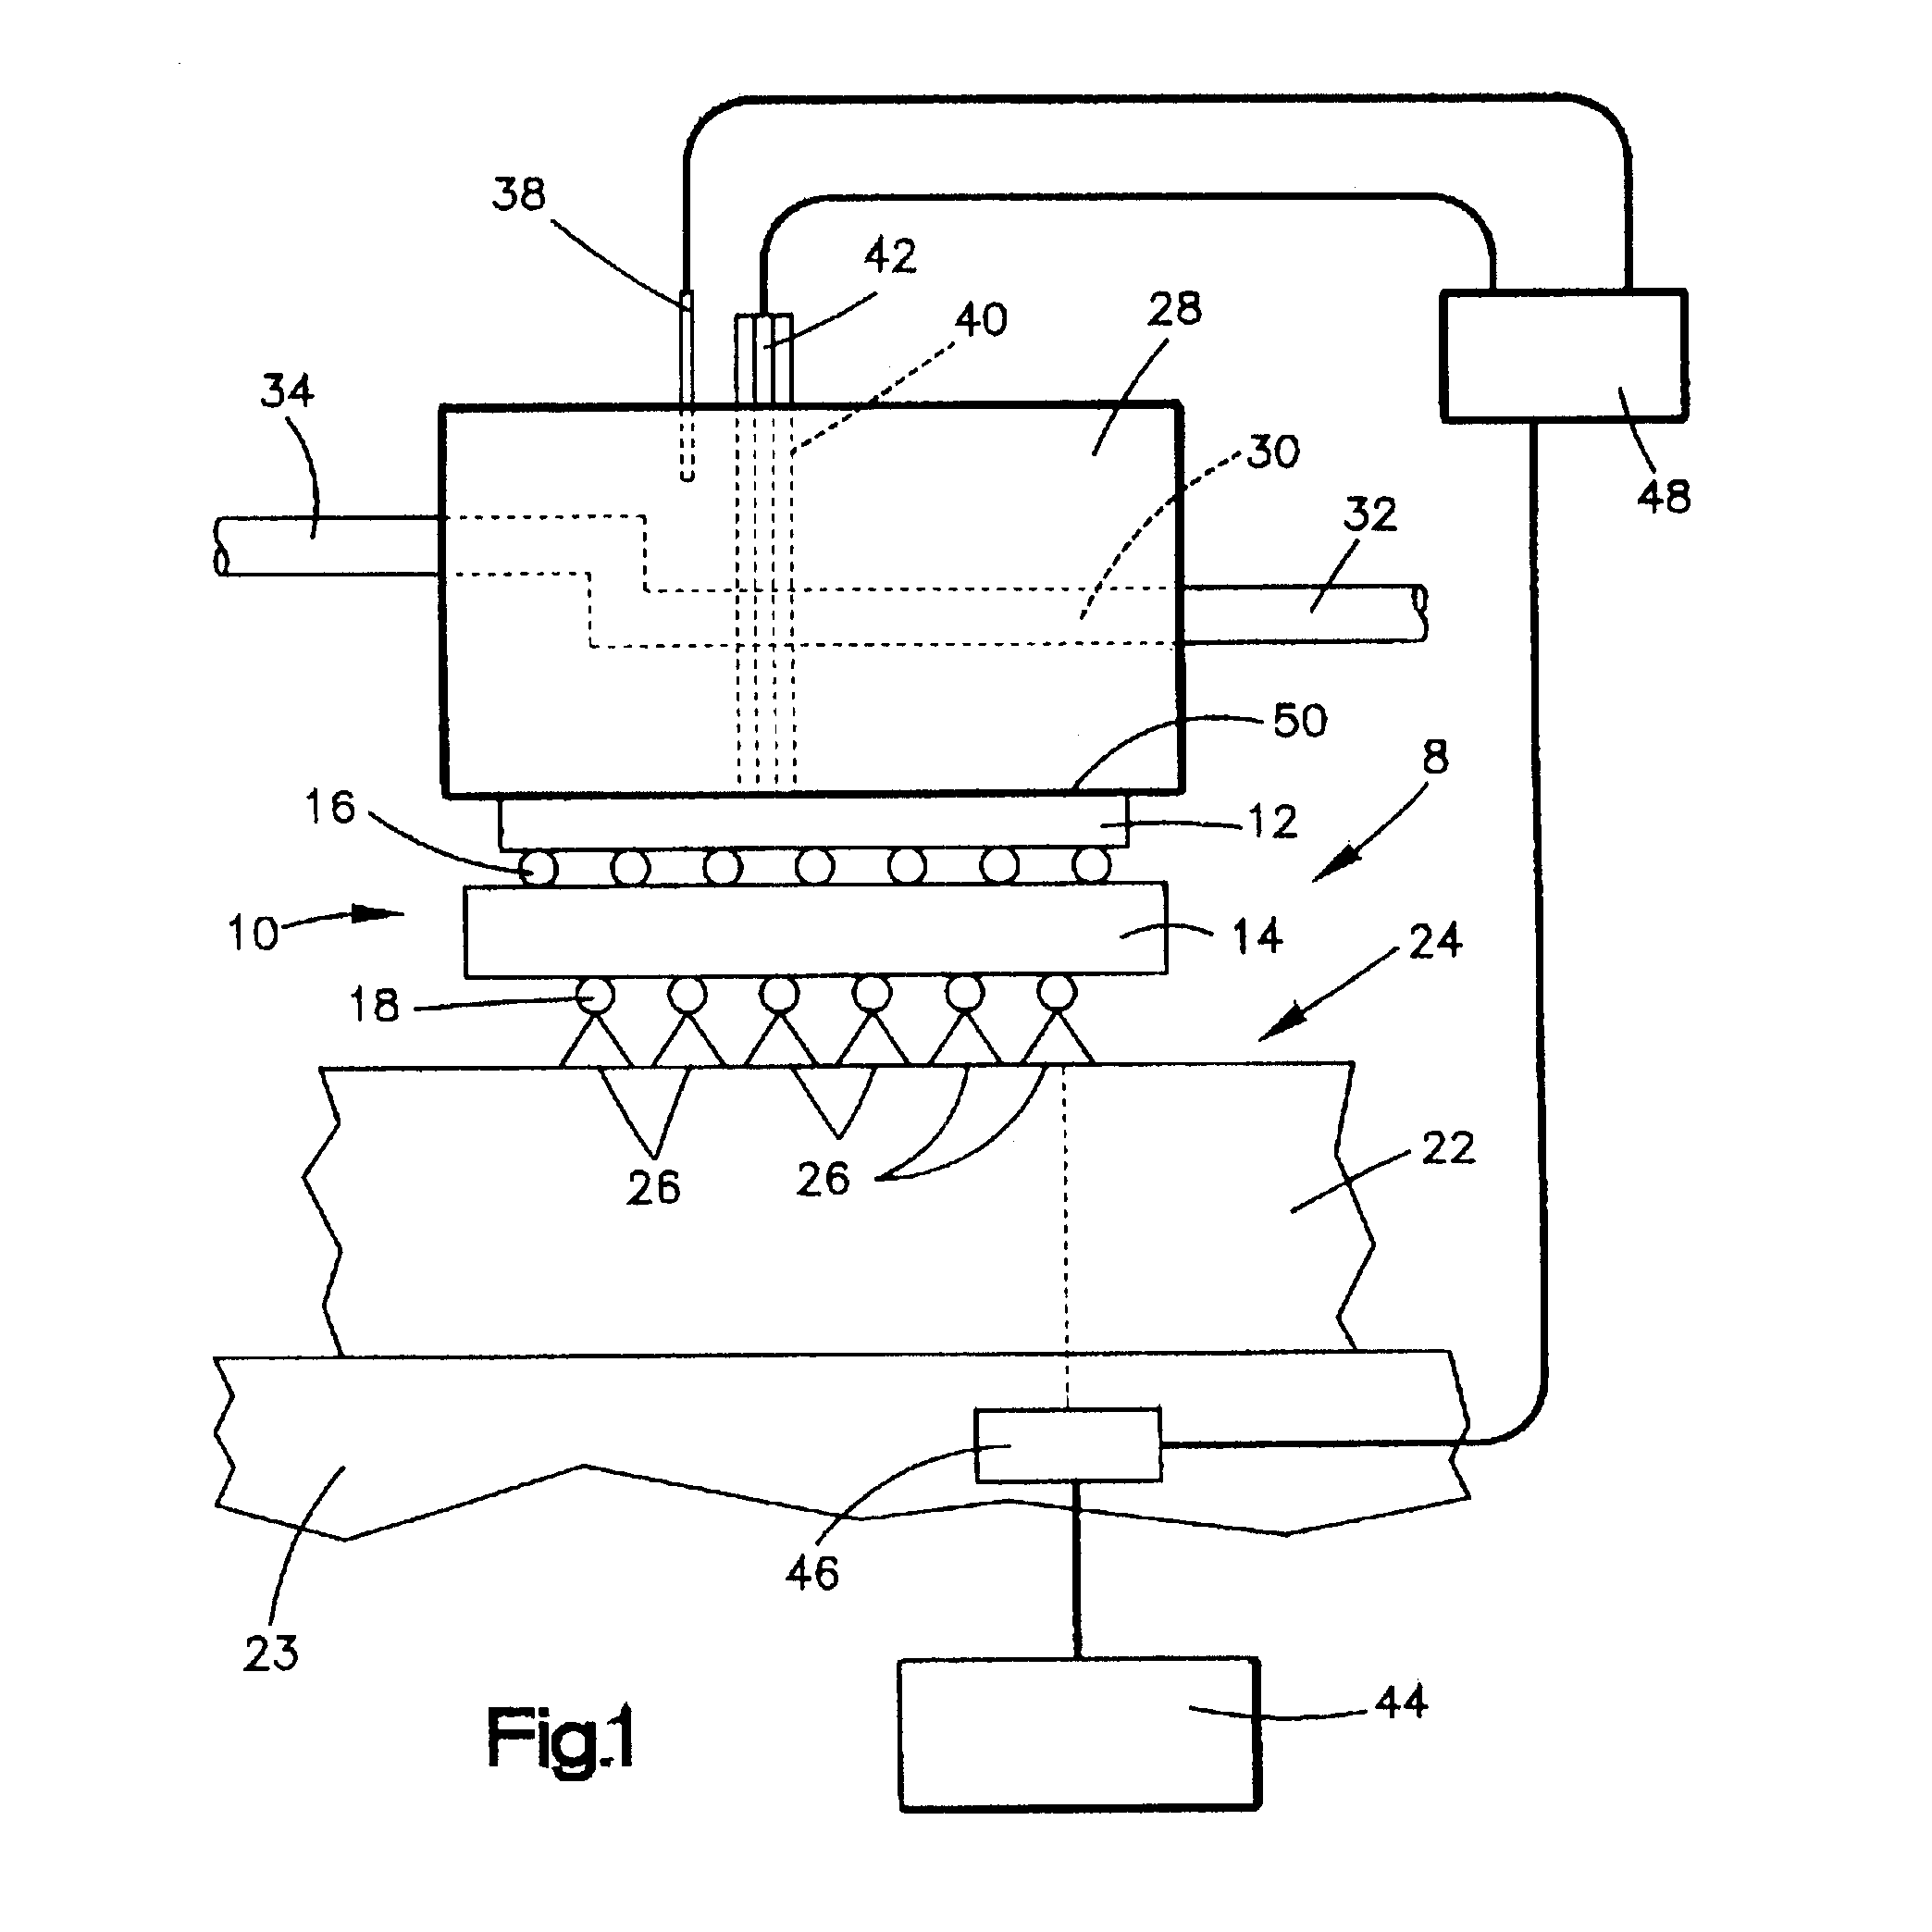 Method of burning in an integrated circuit chip package